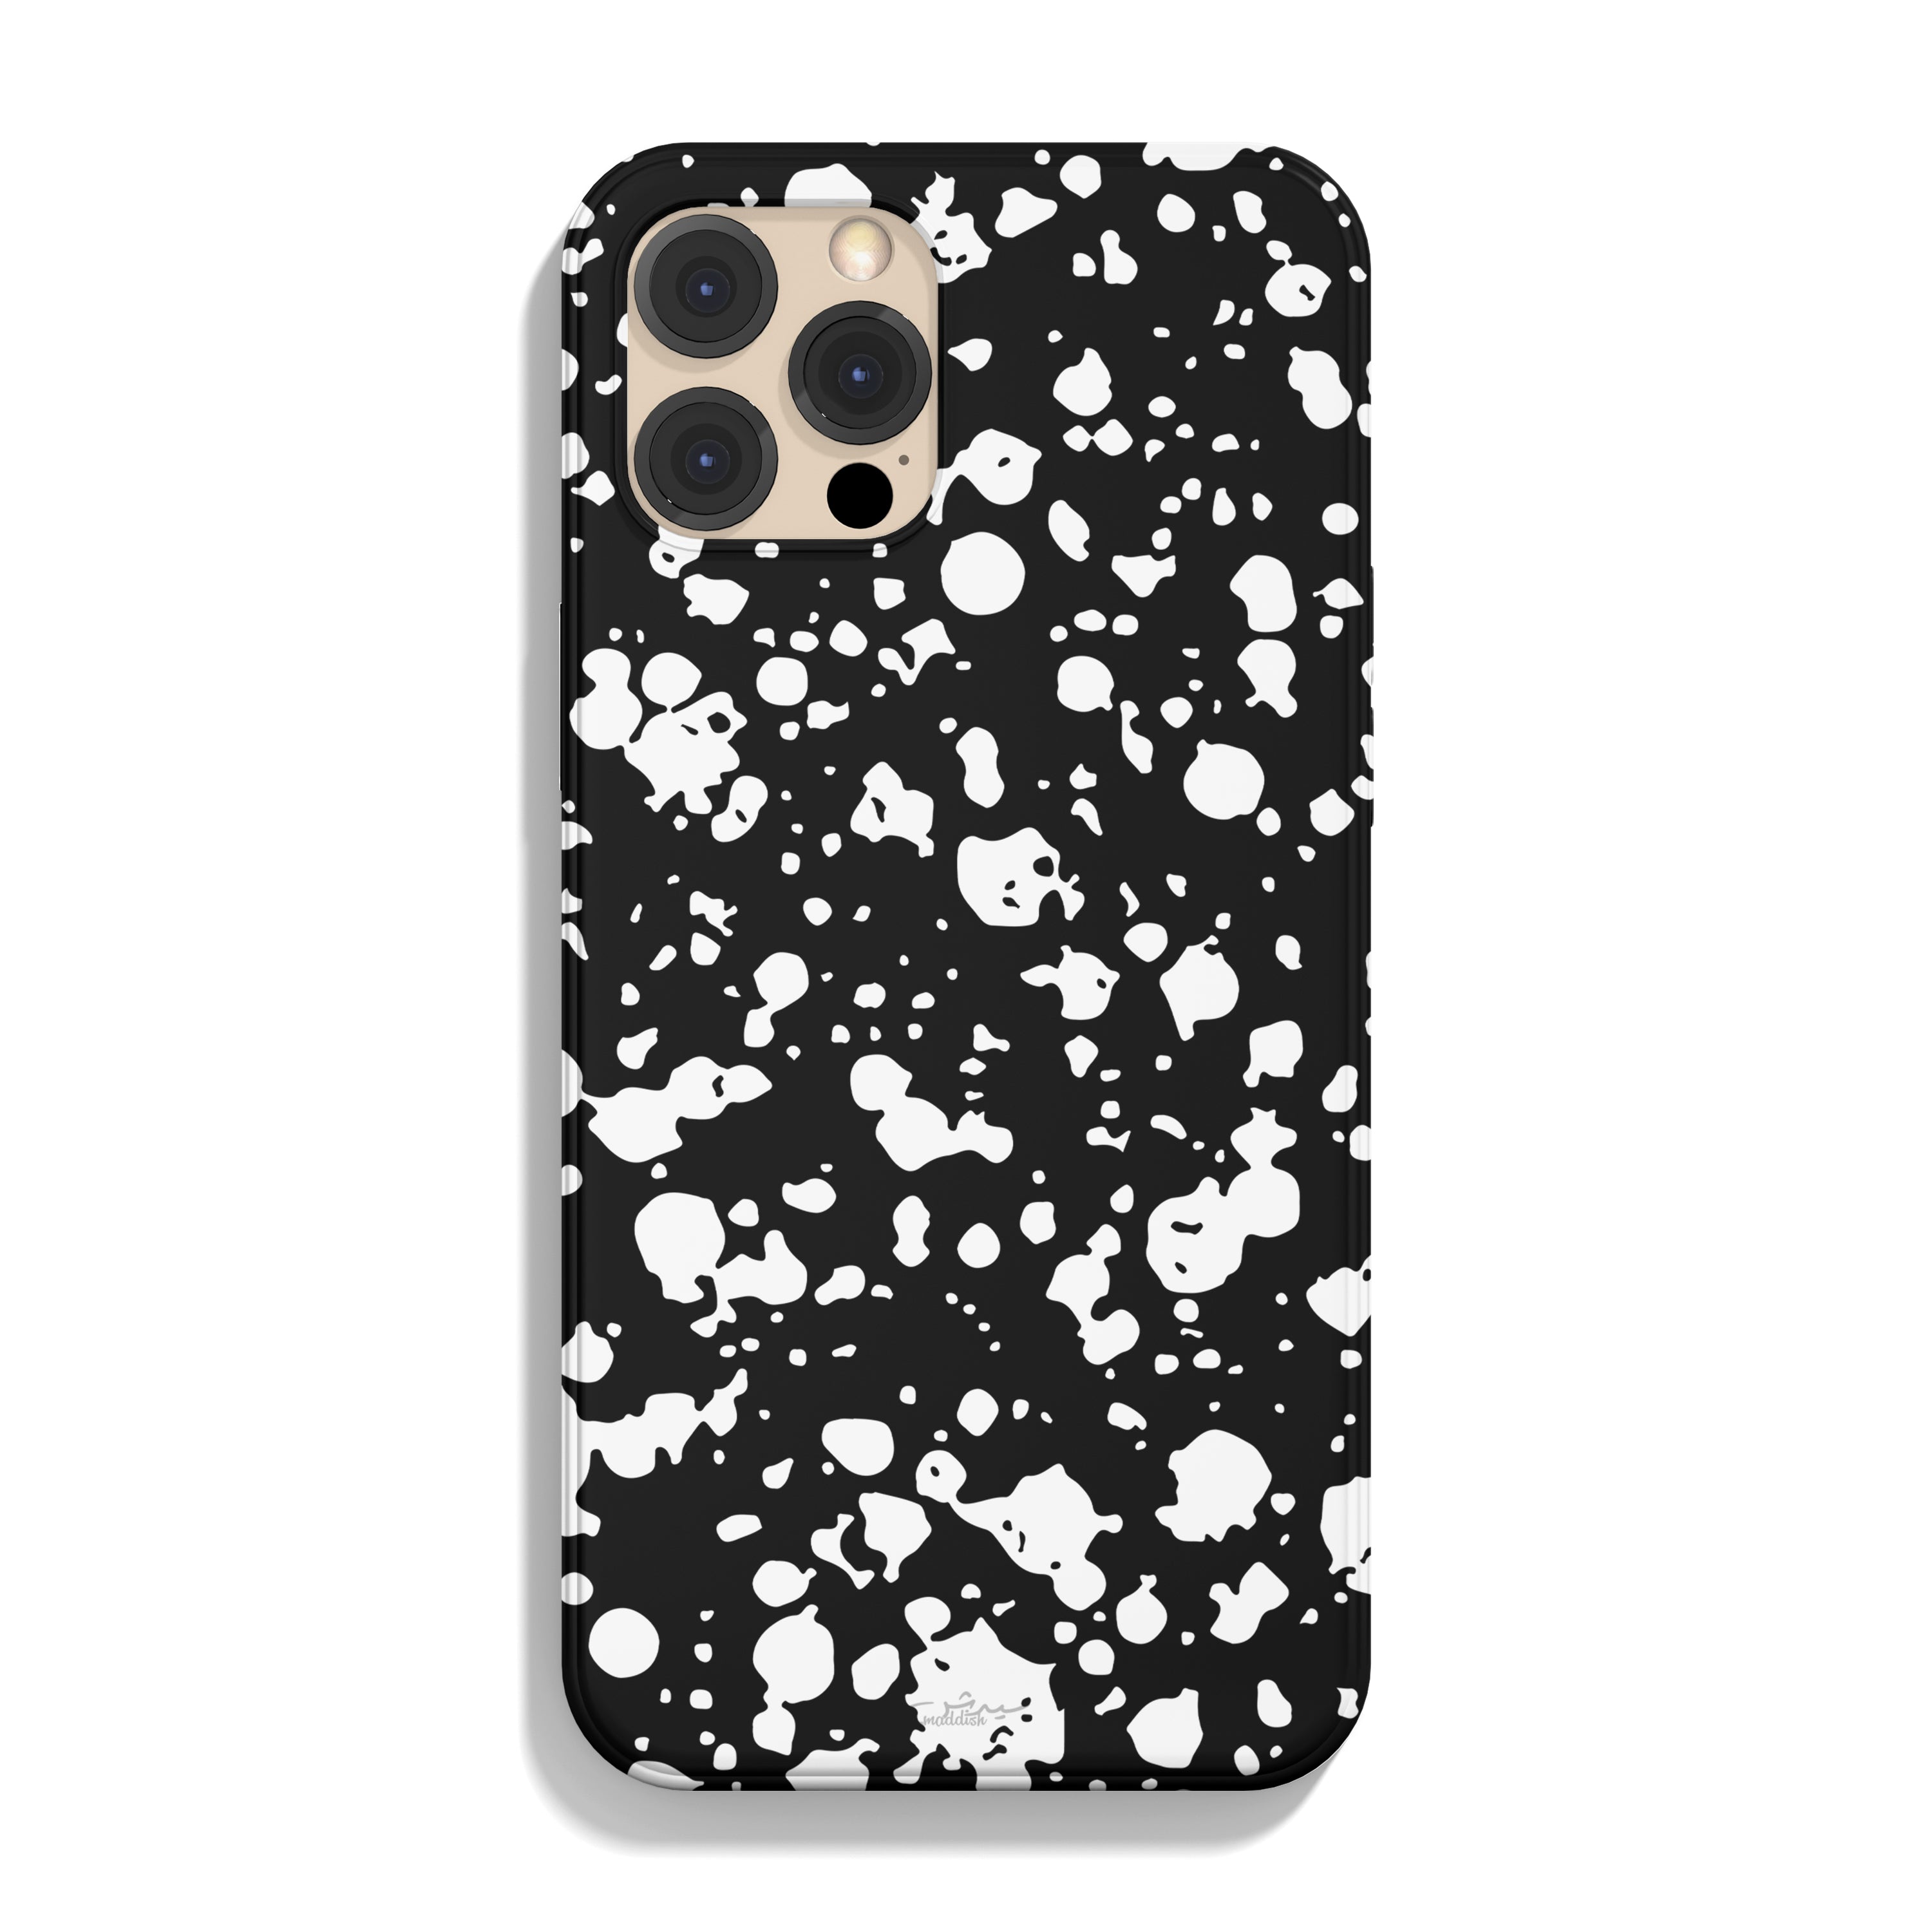 Black with Colorful Speckle Patterns